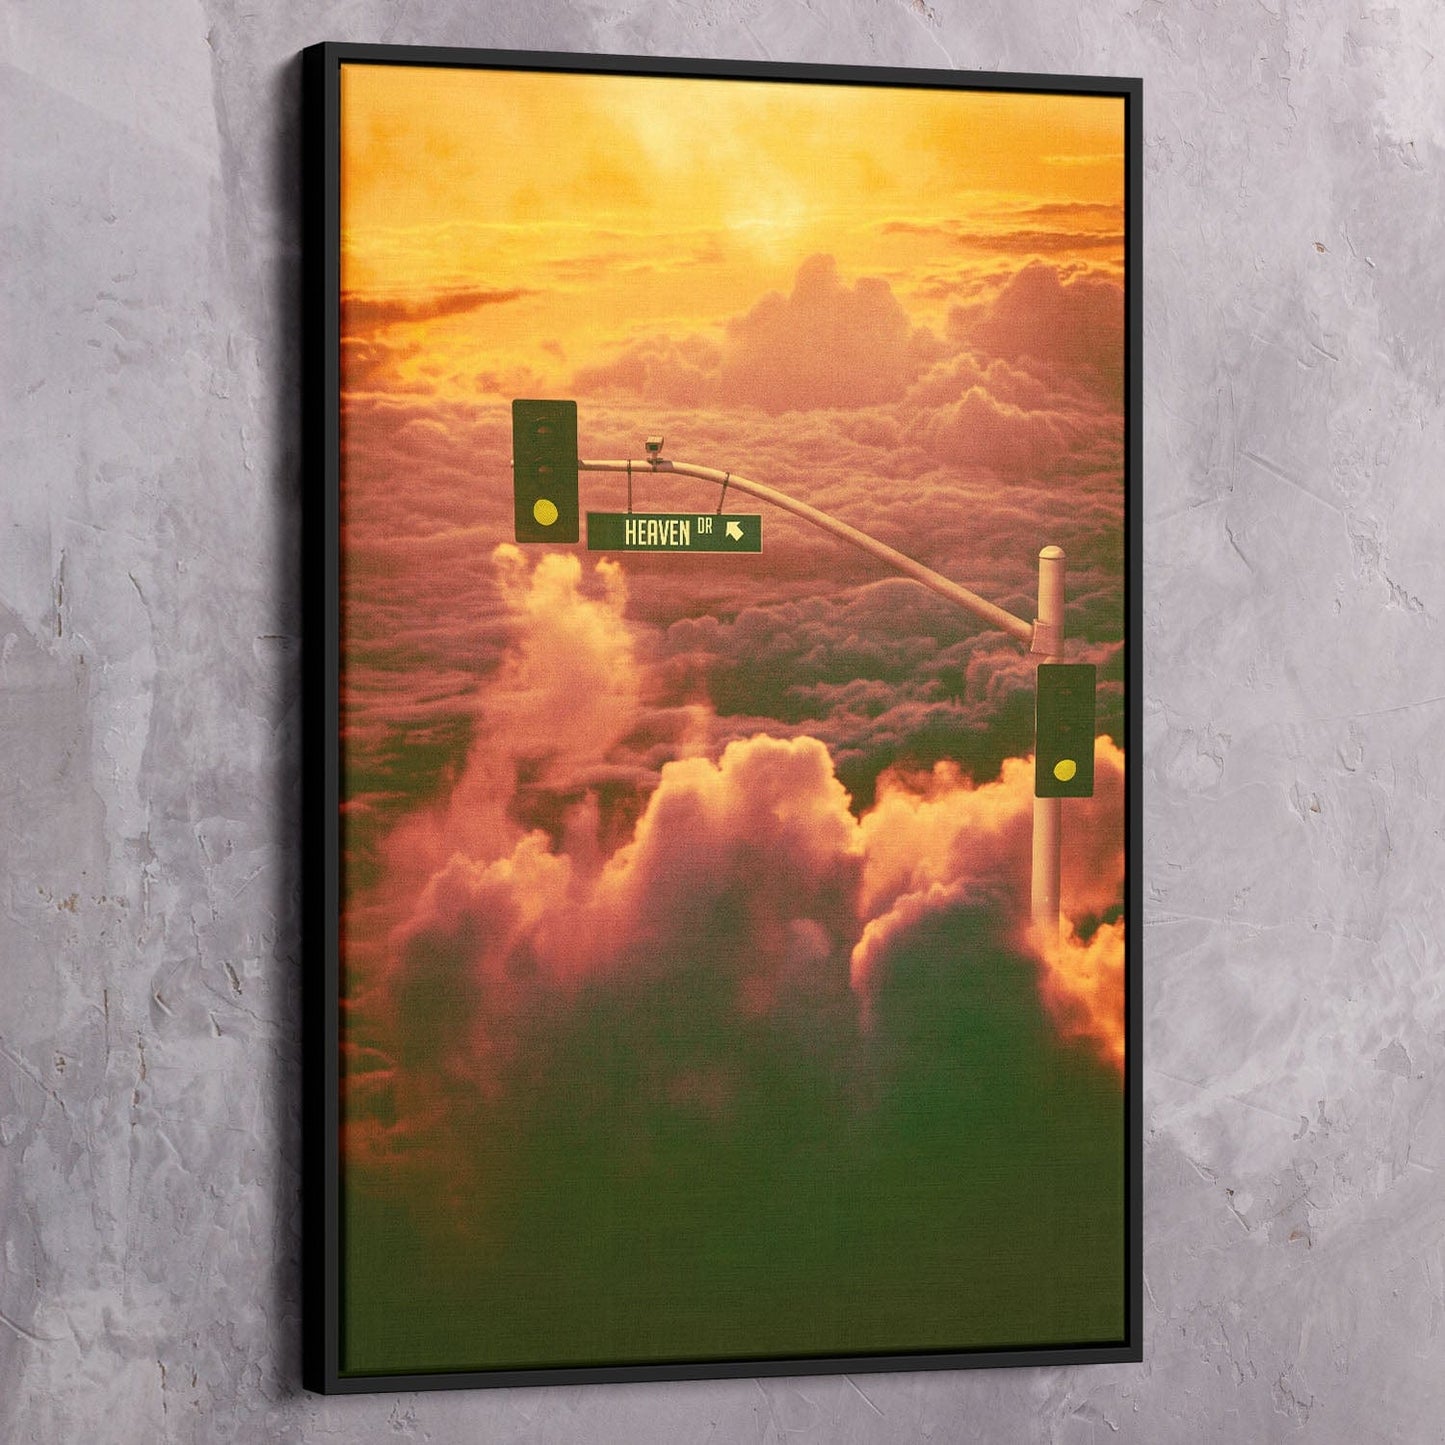 Pathway to Heaven Wall Art | Inspirational Wall Art Motivational Wall Art Quotes Office Art | ImpaktMaker Exclusive Canvas Art Portrait